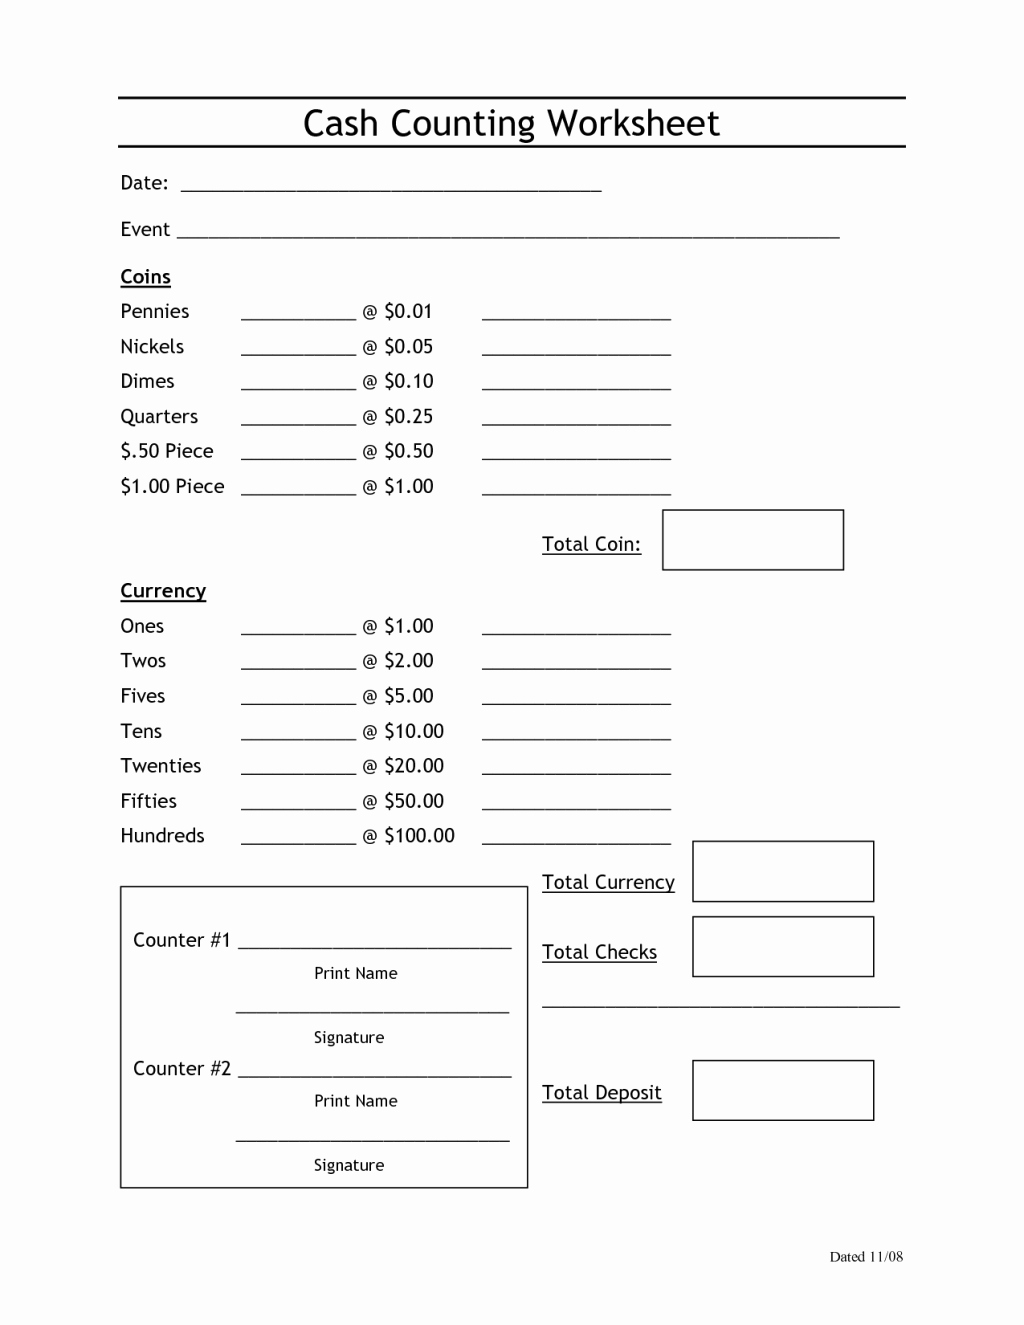 Daily Cash Sheet Template Excel Luxury Cash Drawer Tally Sheet Template